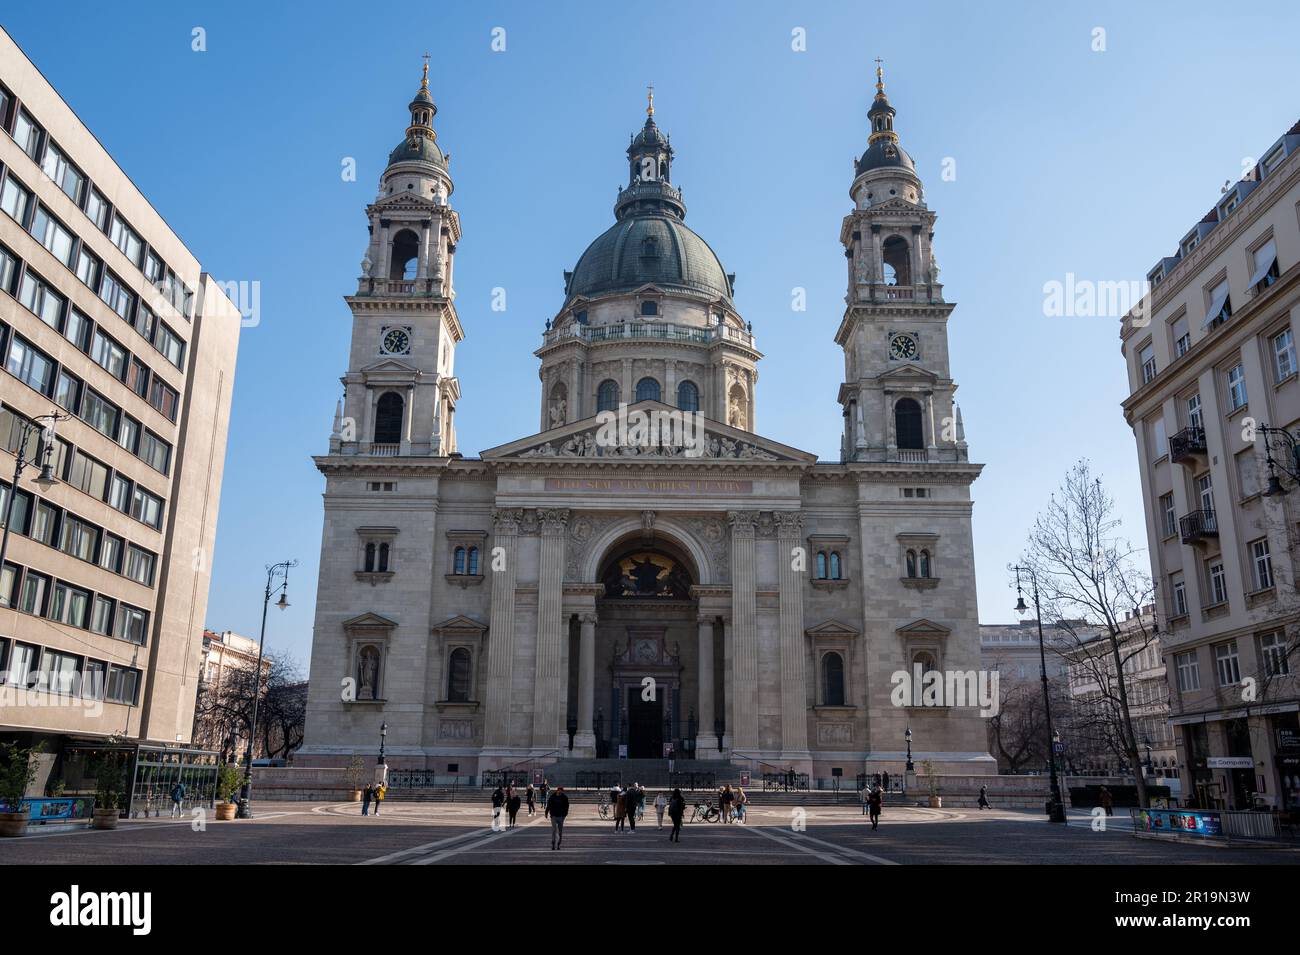 Saint Stephen's Basilica in central Budapest, capital city of Hungary. Landmark and place of worship. Built between 1851 and 1905 Stock Photo